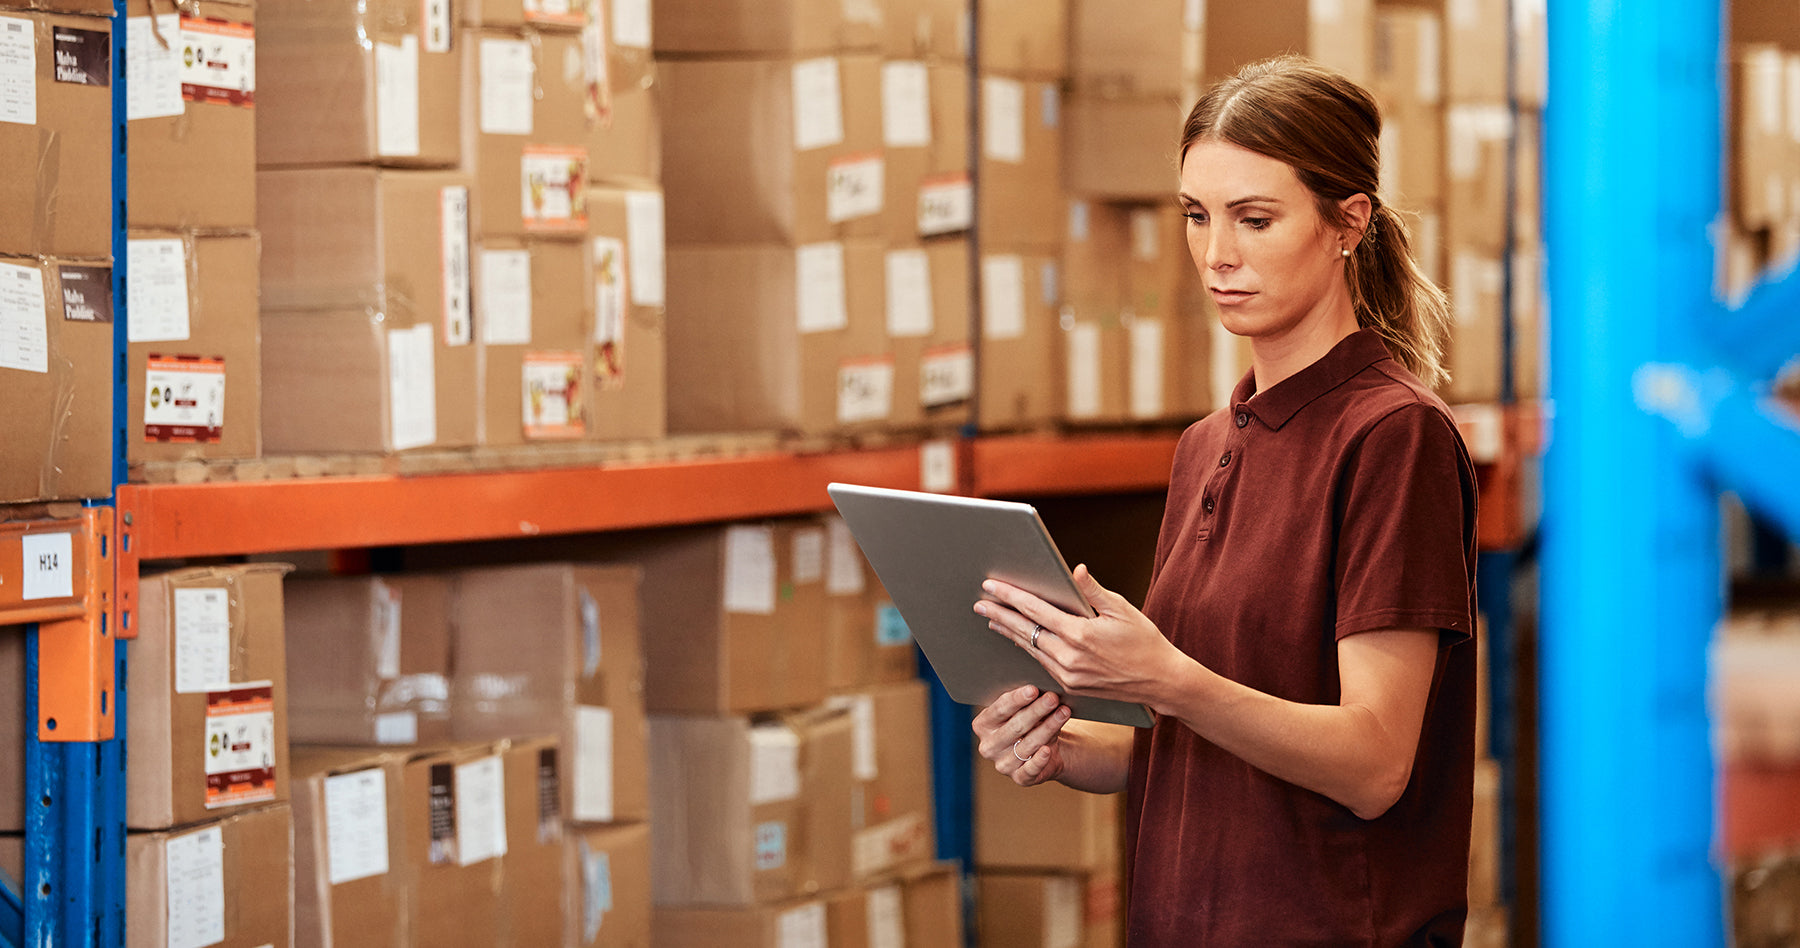 Article About The Core Benefits Of Getting Order Fulfillment Services